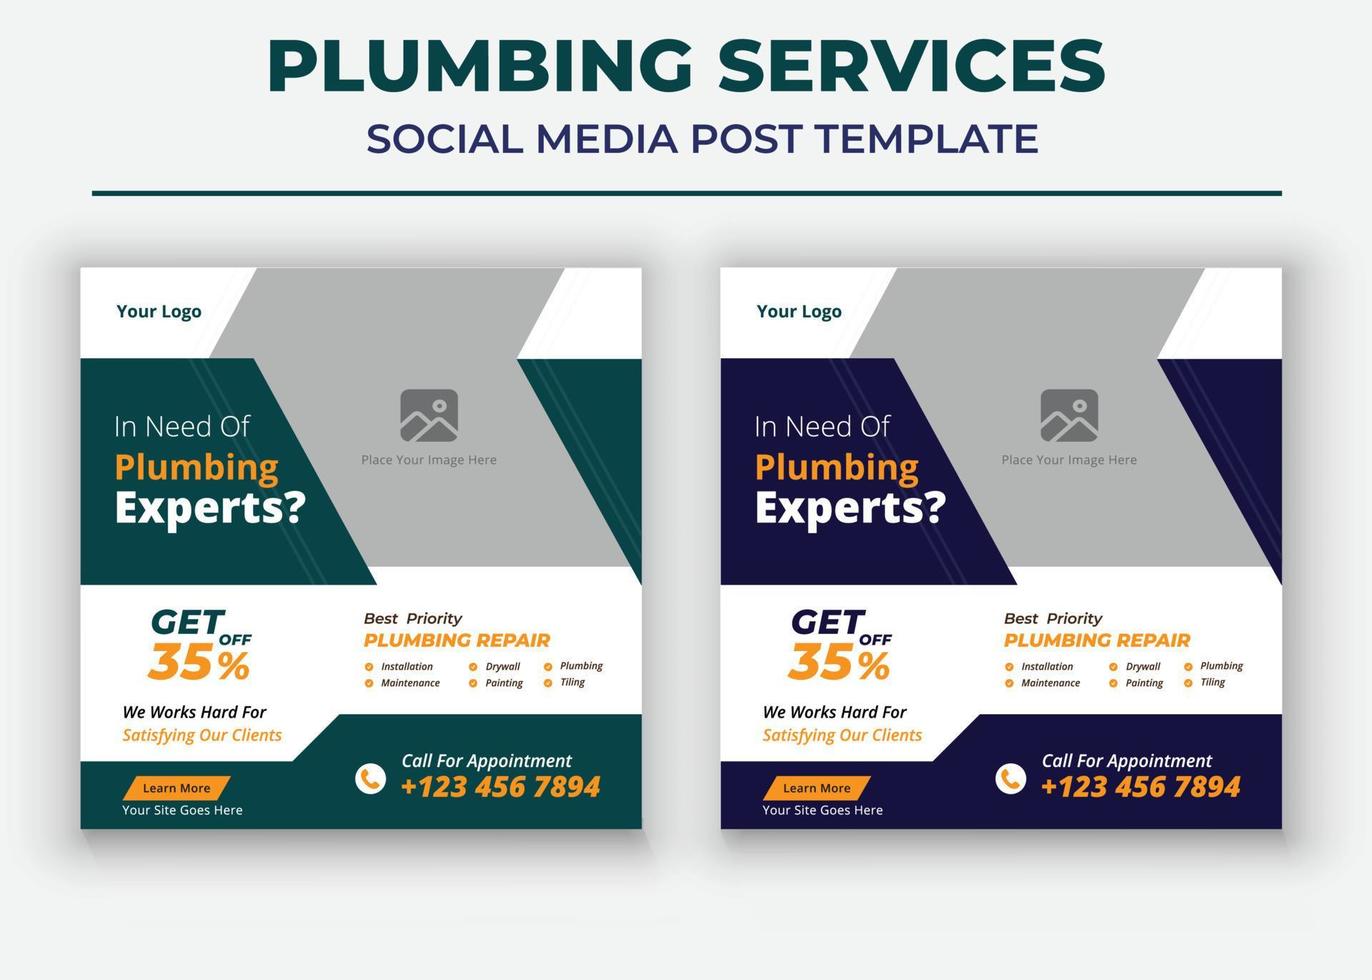 In Need Of Plumbing Experts, Plumber Service Social Media Template vector